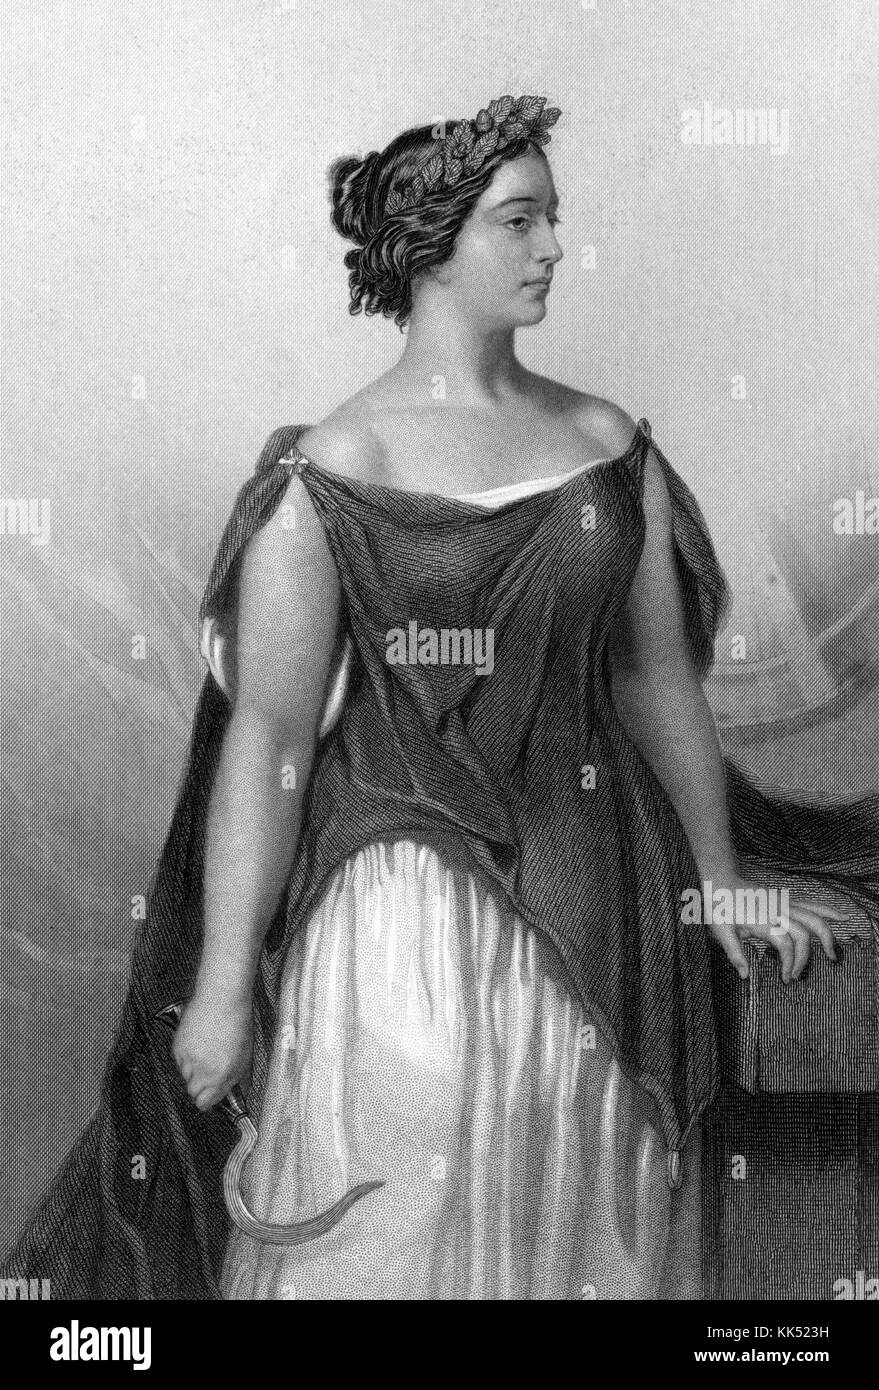 An engraving from a portrait of Giulia Grisi appearing in her costume from the opera Norma, she was an Italian opera singer who was one of the leading sopranos of the 19th century, she performed in Europe, the United States, and South America, in the engraving she is costumed as the character Adalgisa which is a role she originated in 1831, 1844. From the New York Public Library. Stock Photo